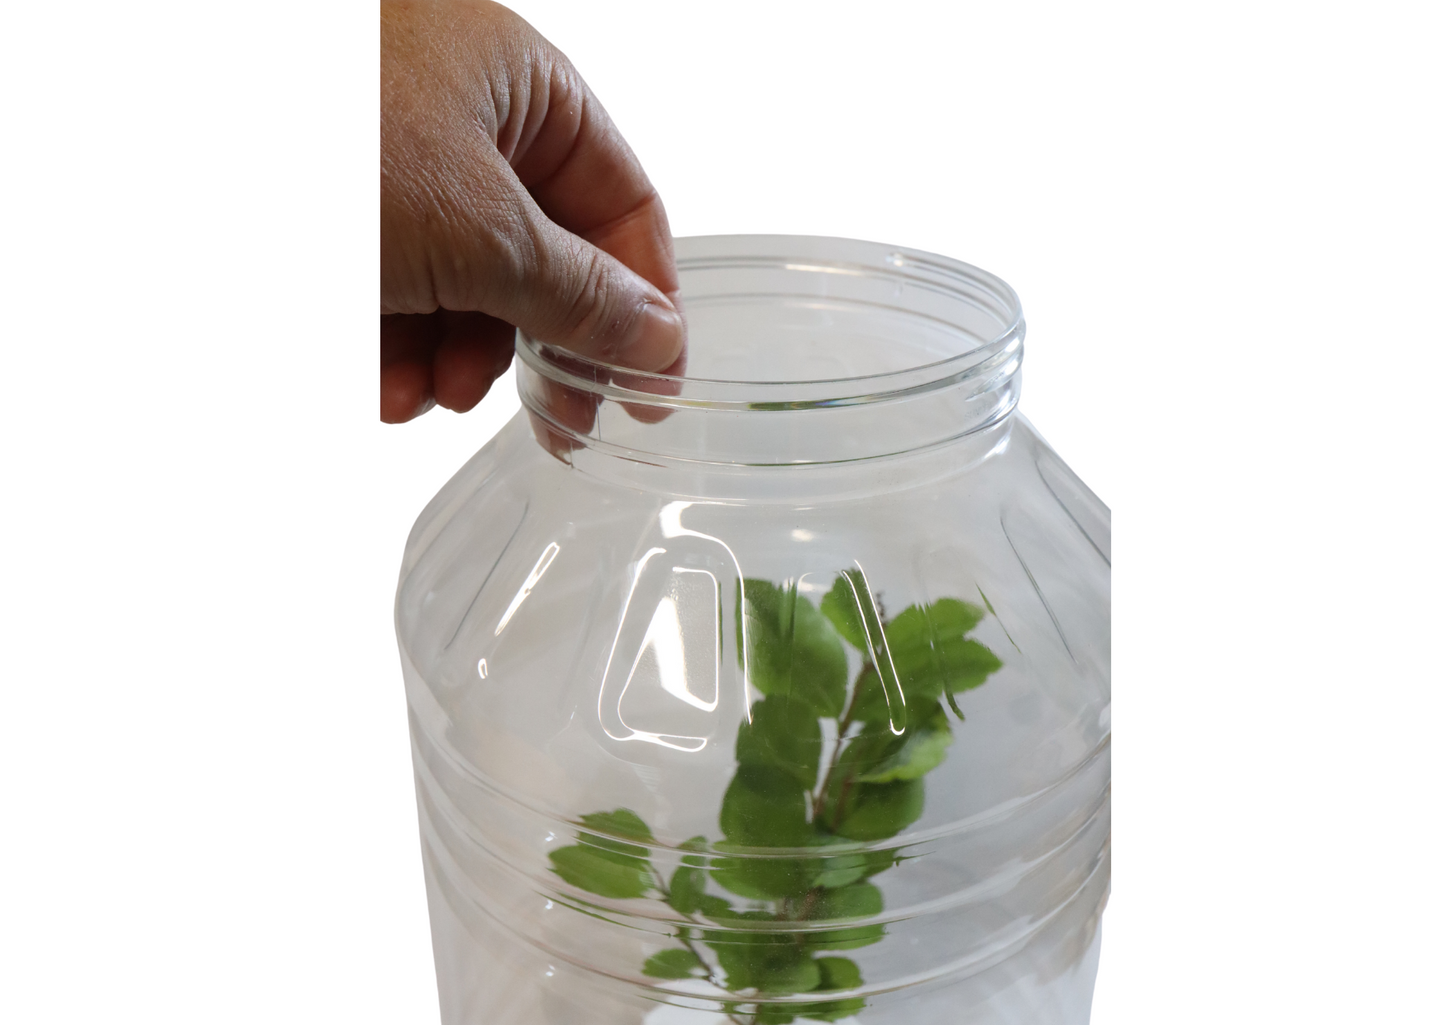 XXL Stick Insect Jar Including Substrate & Twig Pot Fine Mesh